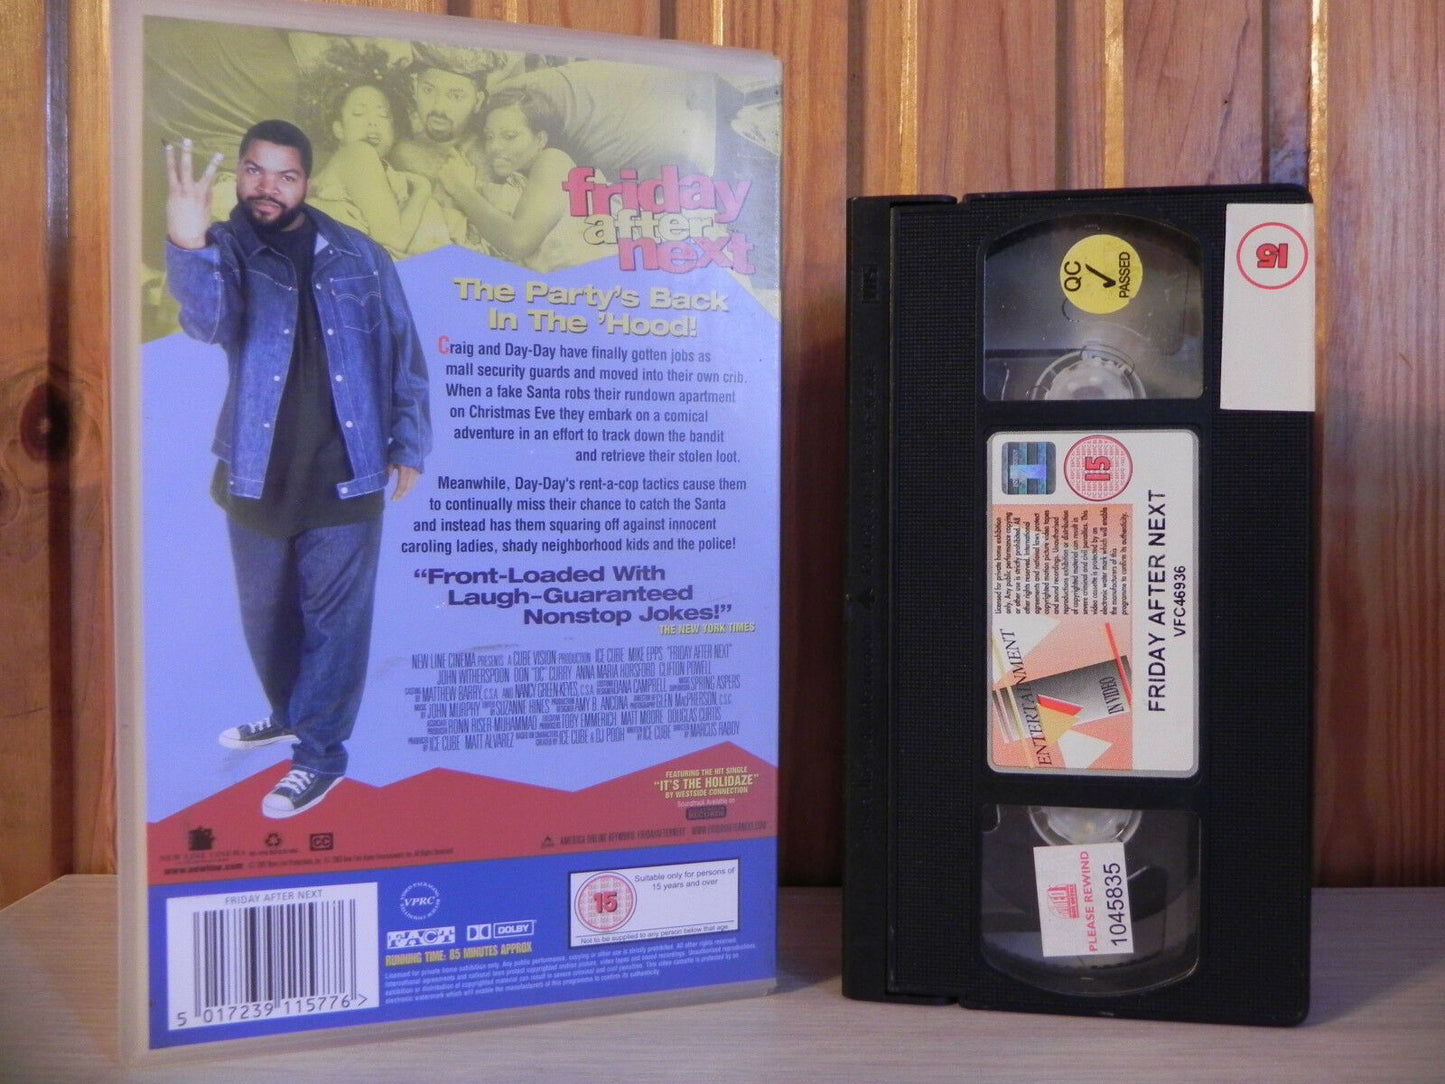 FRIDAY AFTER NEXT - Big Box - Ex-Rental - Comedy - ICE CUBE - Collectable VHS-